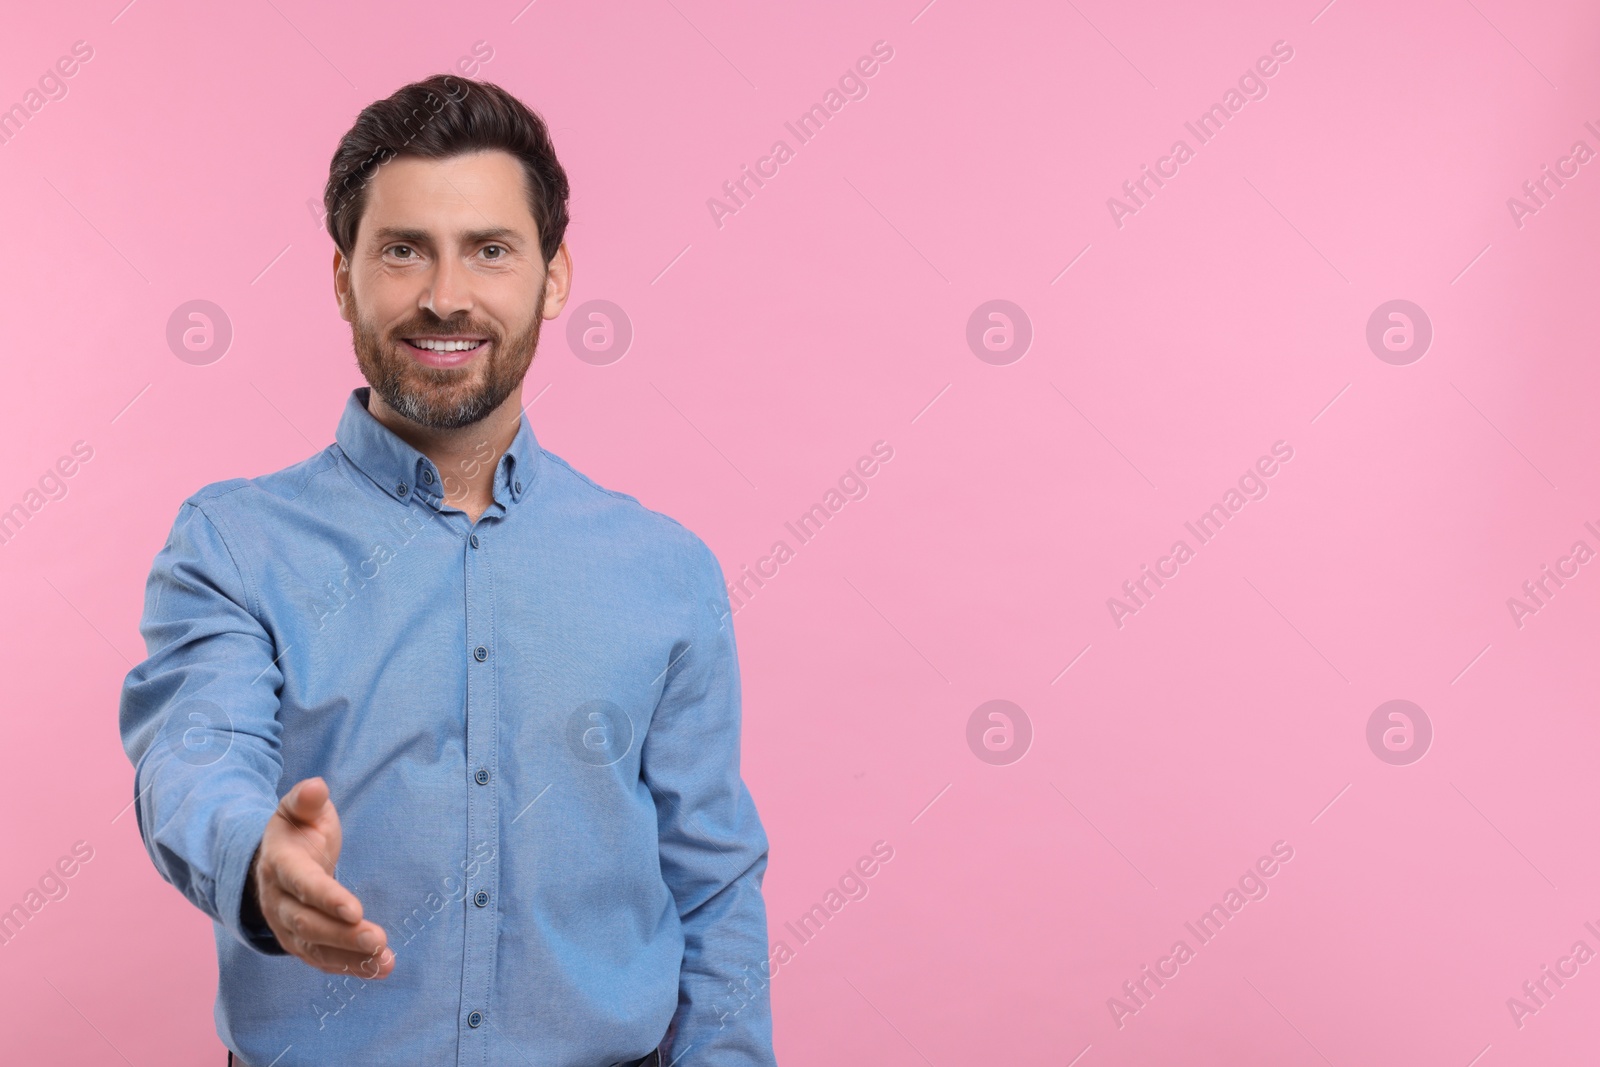 Photo of Happy man welcoming and offering handshake on pink background. Space for text